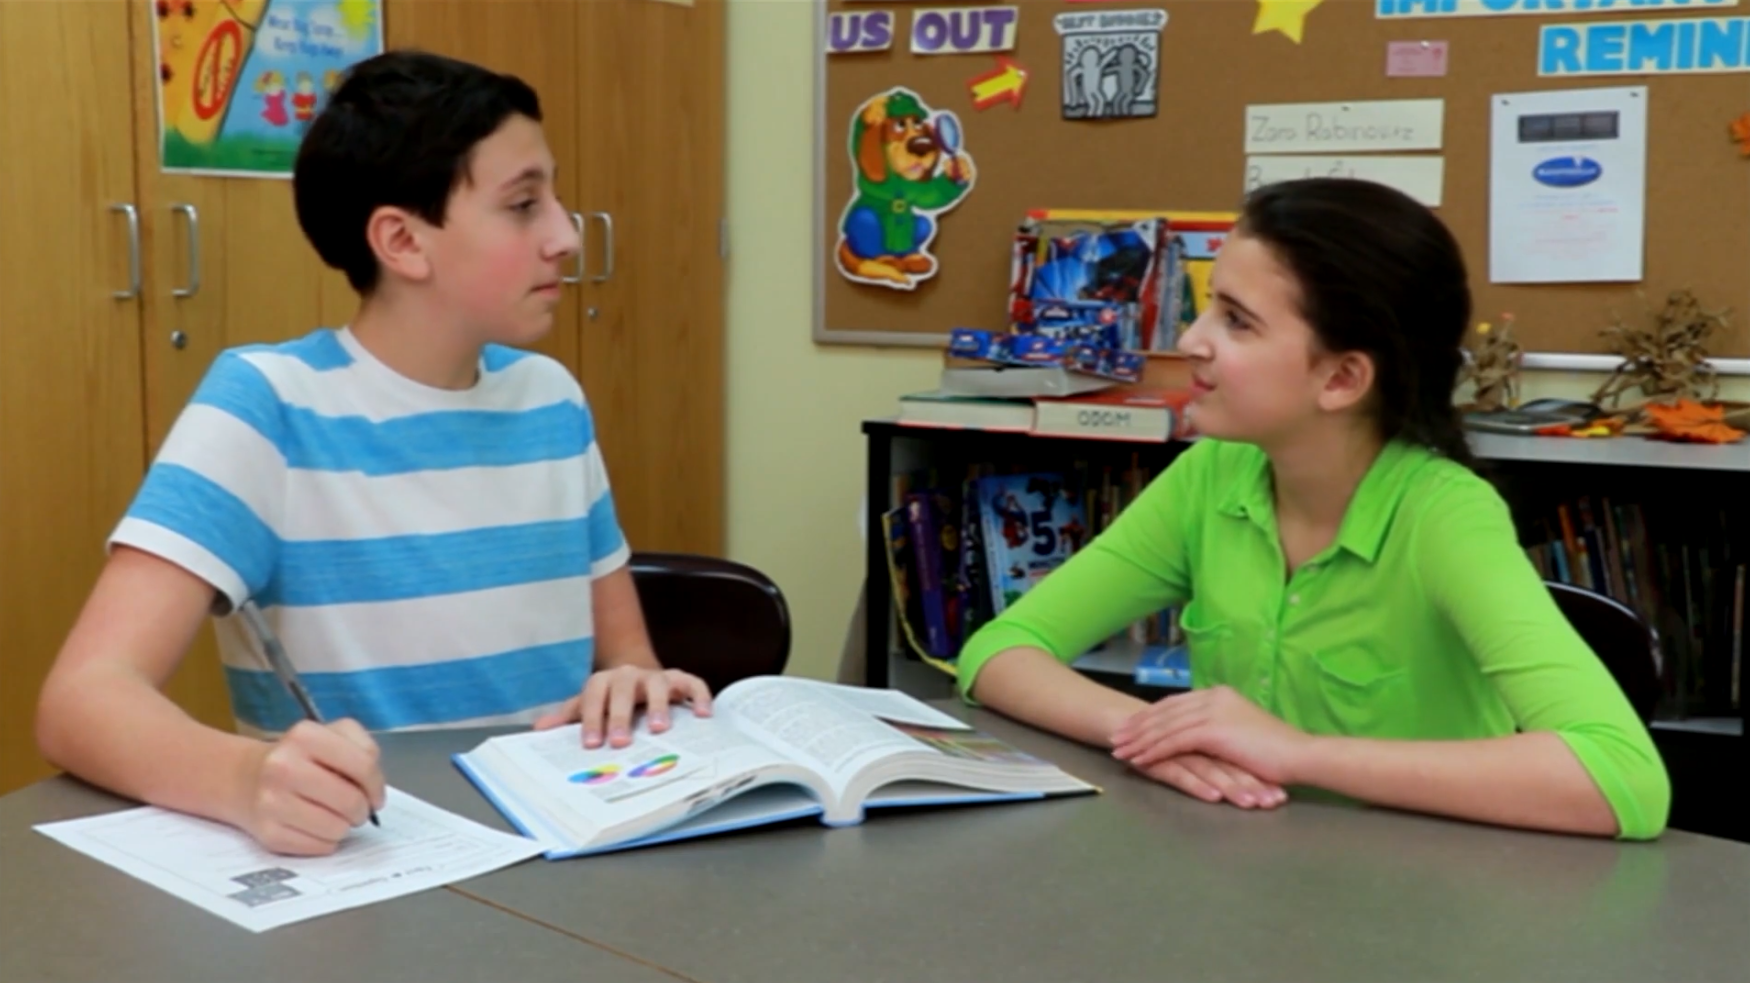 Teaching Students to Get Attention Respectfully: Activities and Discussions